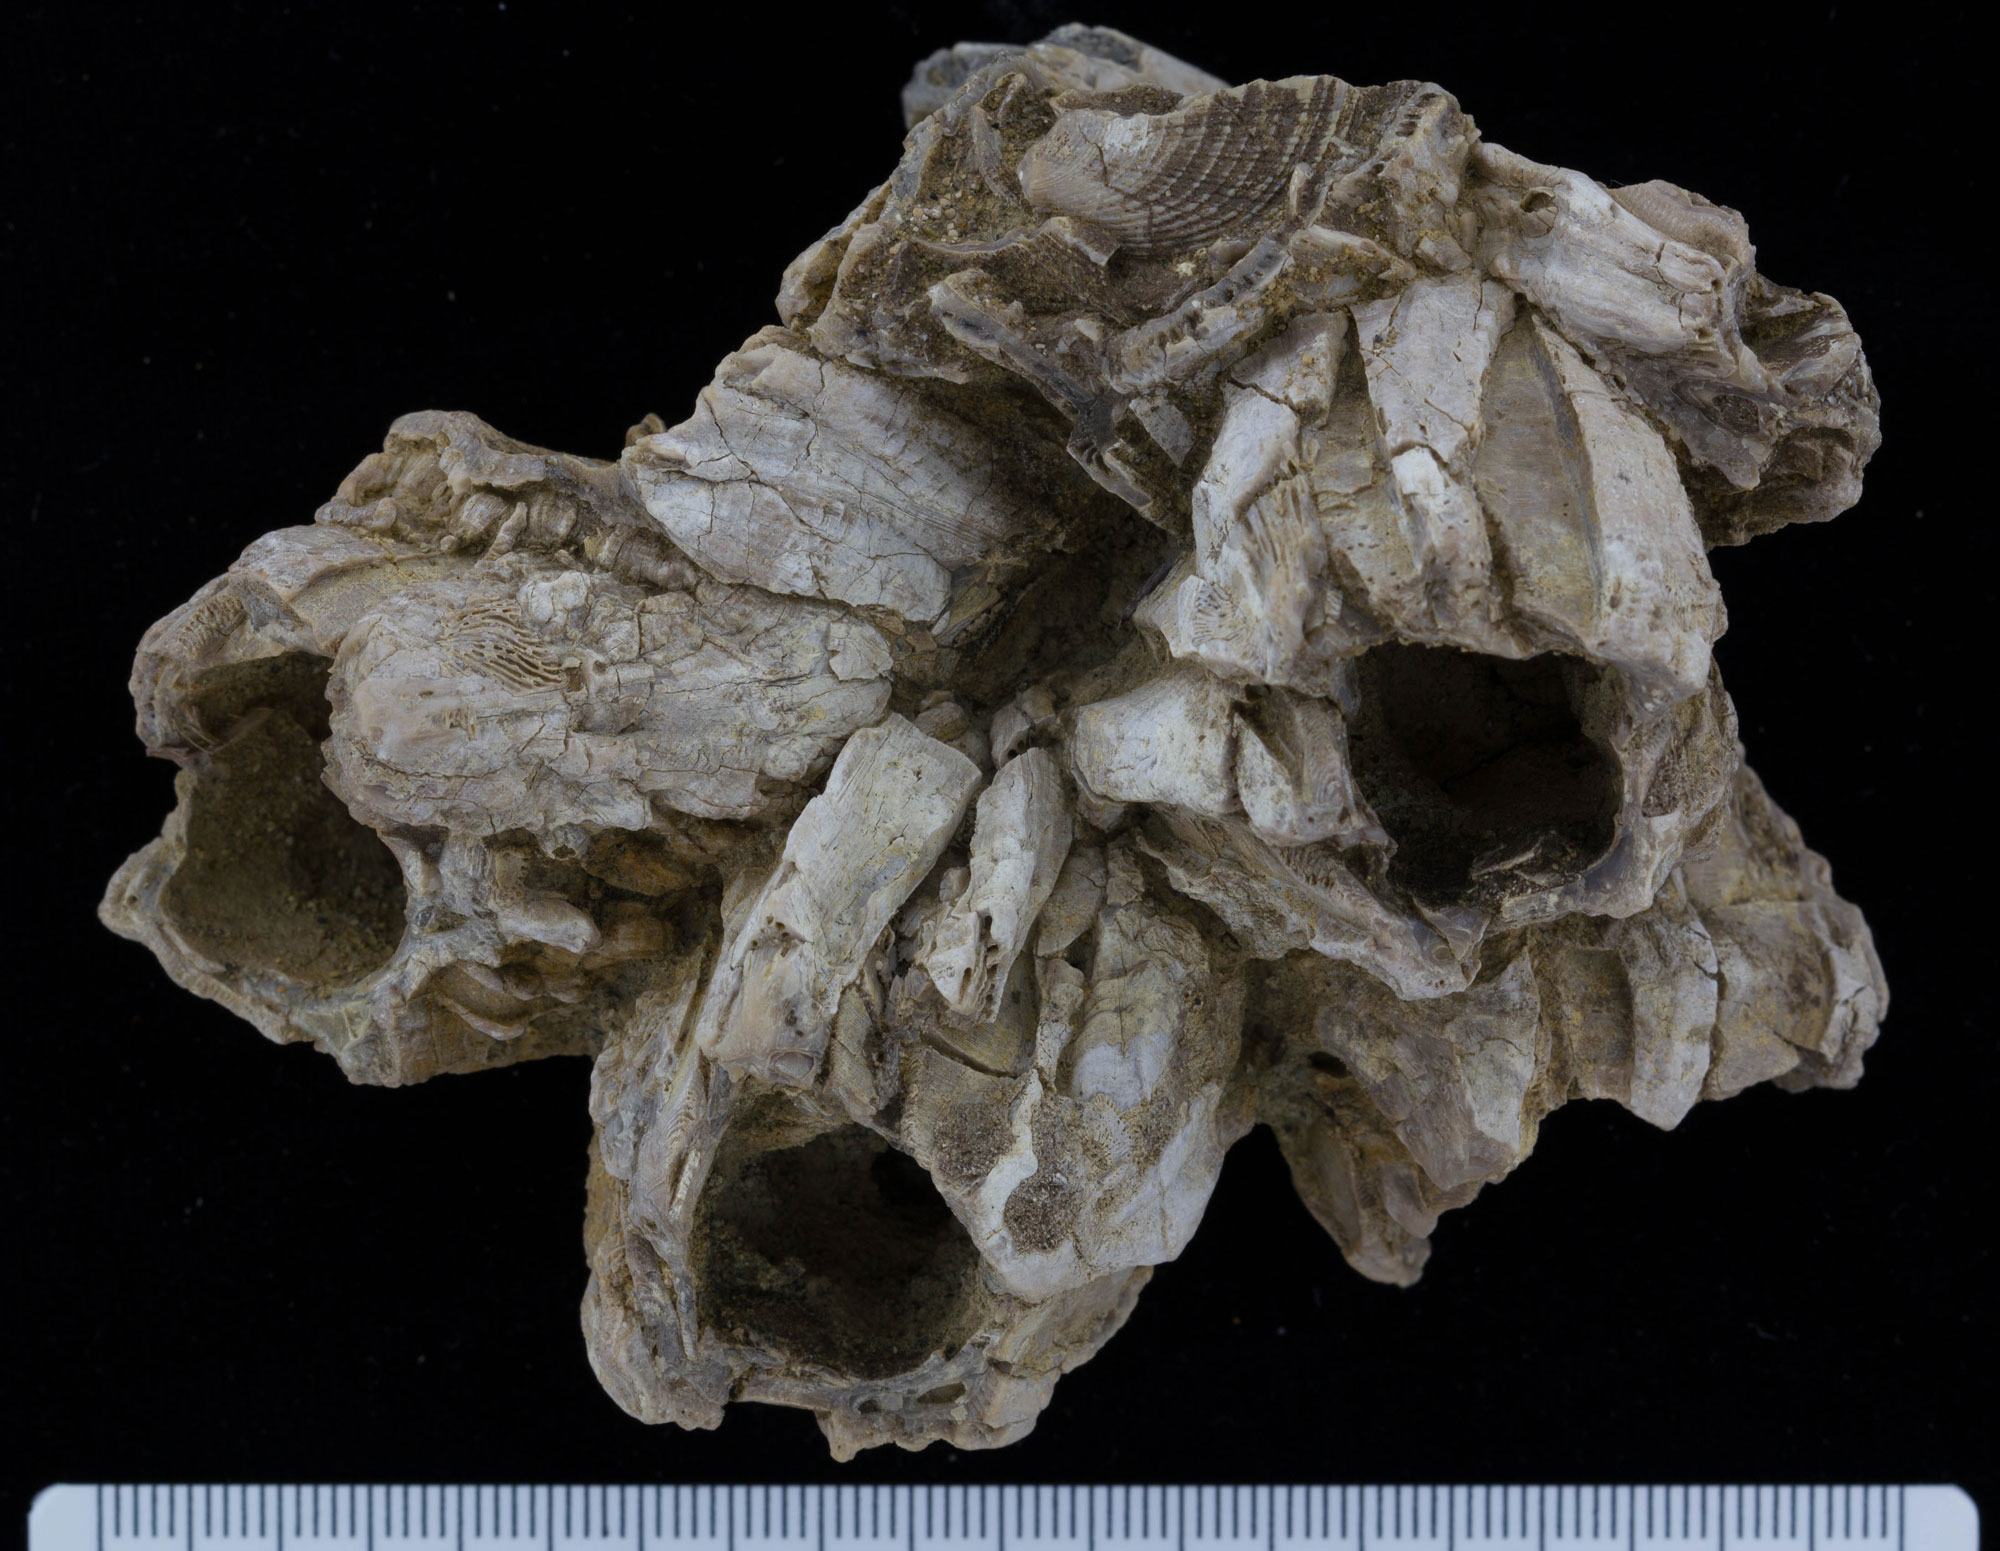 Photograph of a group of fossil barnacles from the Pliocene of California. The barnacles look like short tubes that are clustered together. The specimen is about 10 centimeters across based on a ruler at the bottom of the photograph.